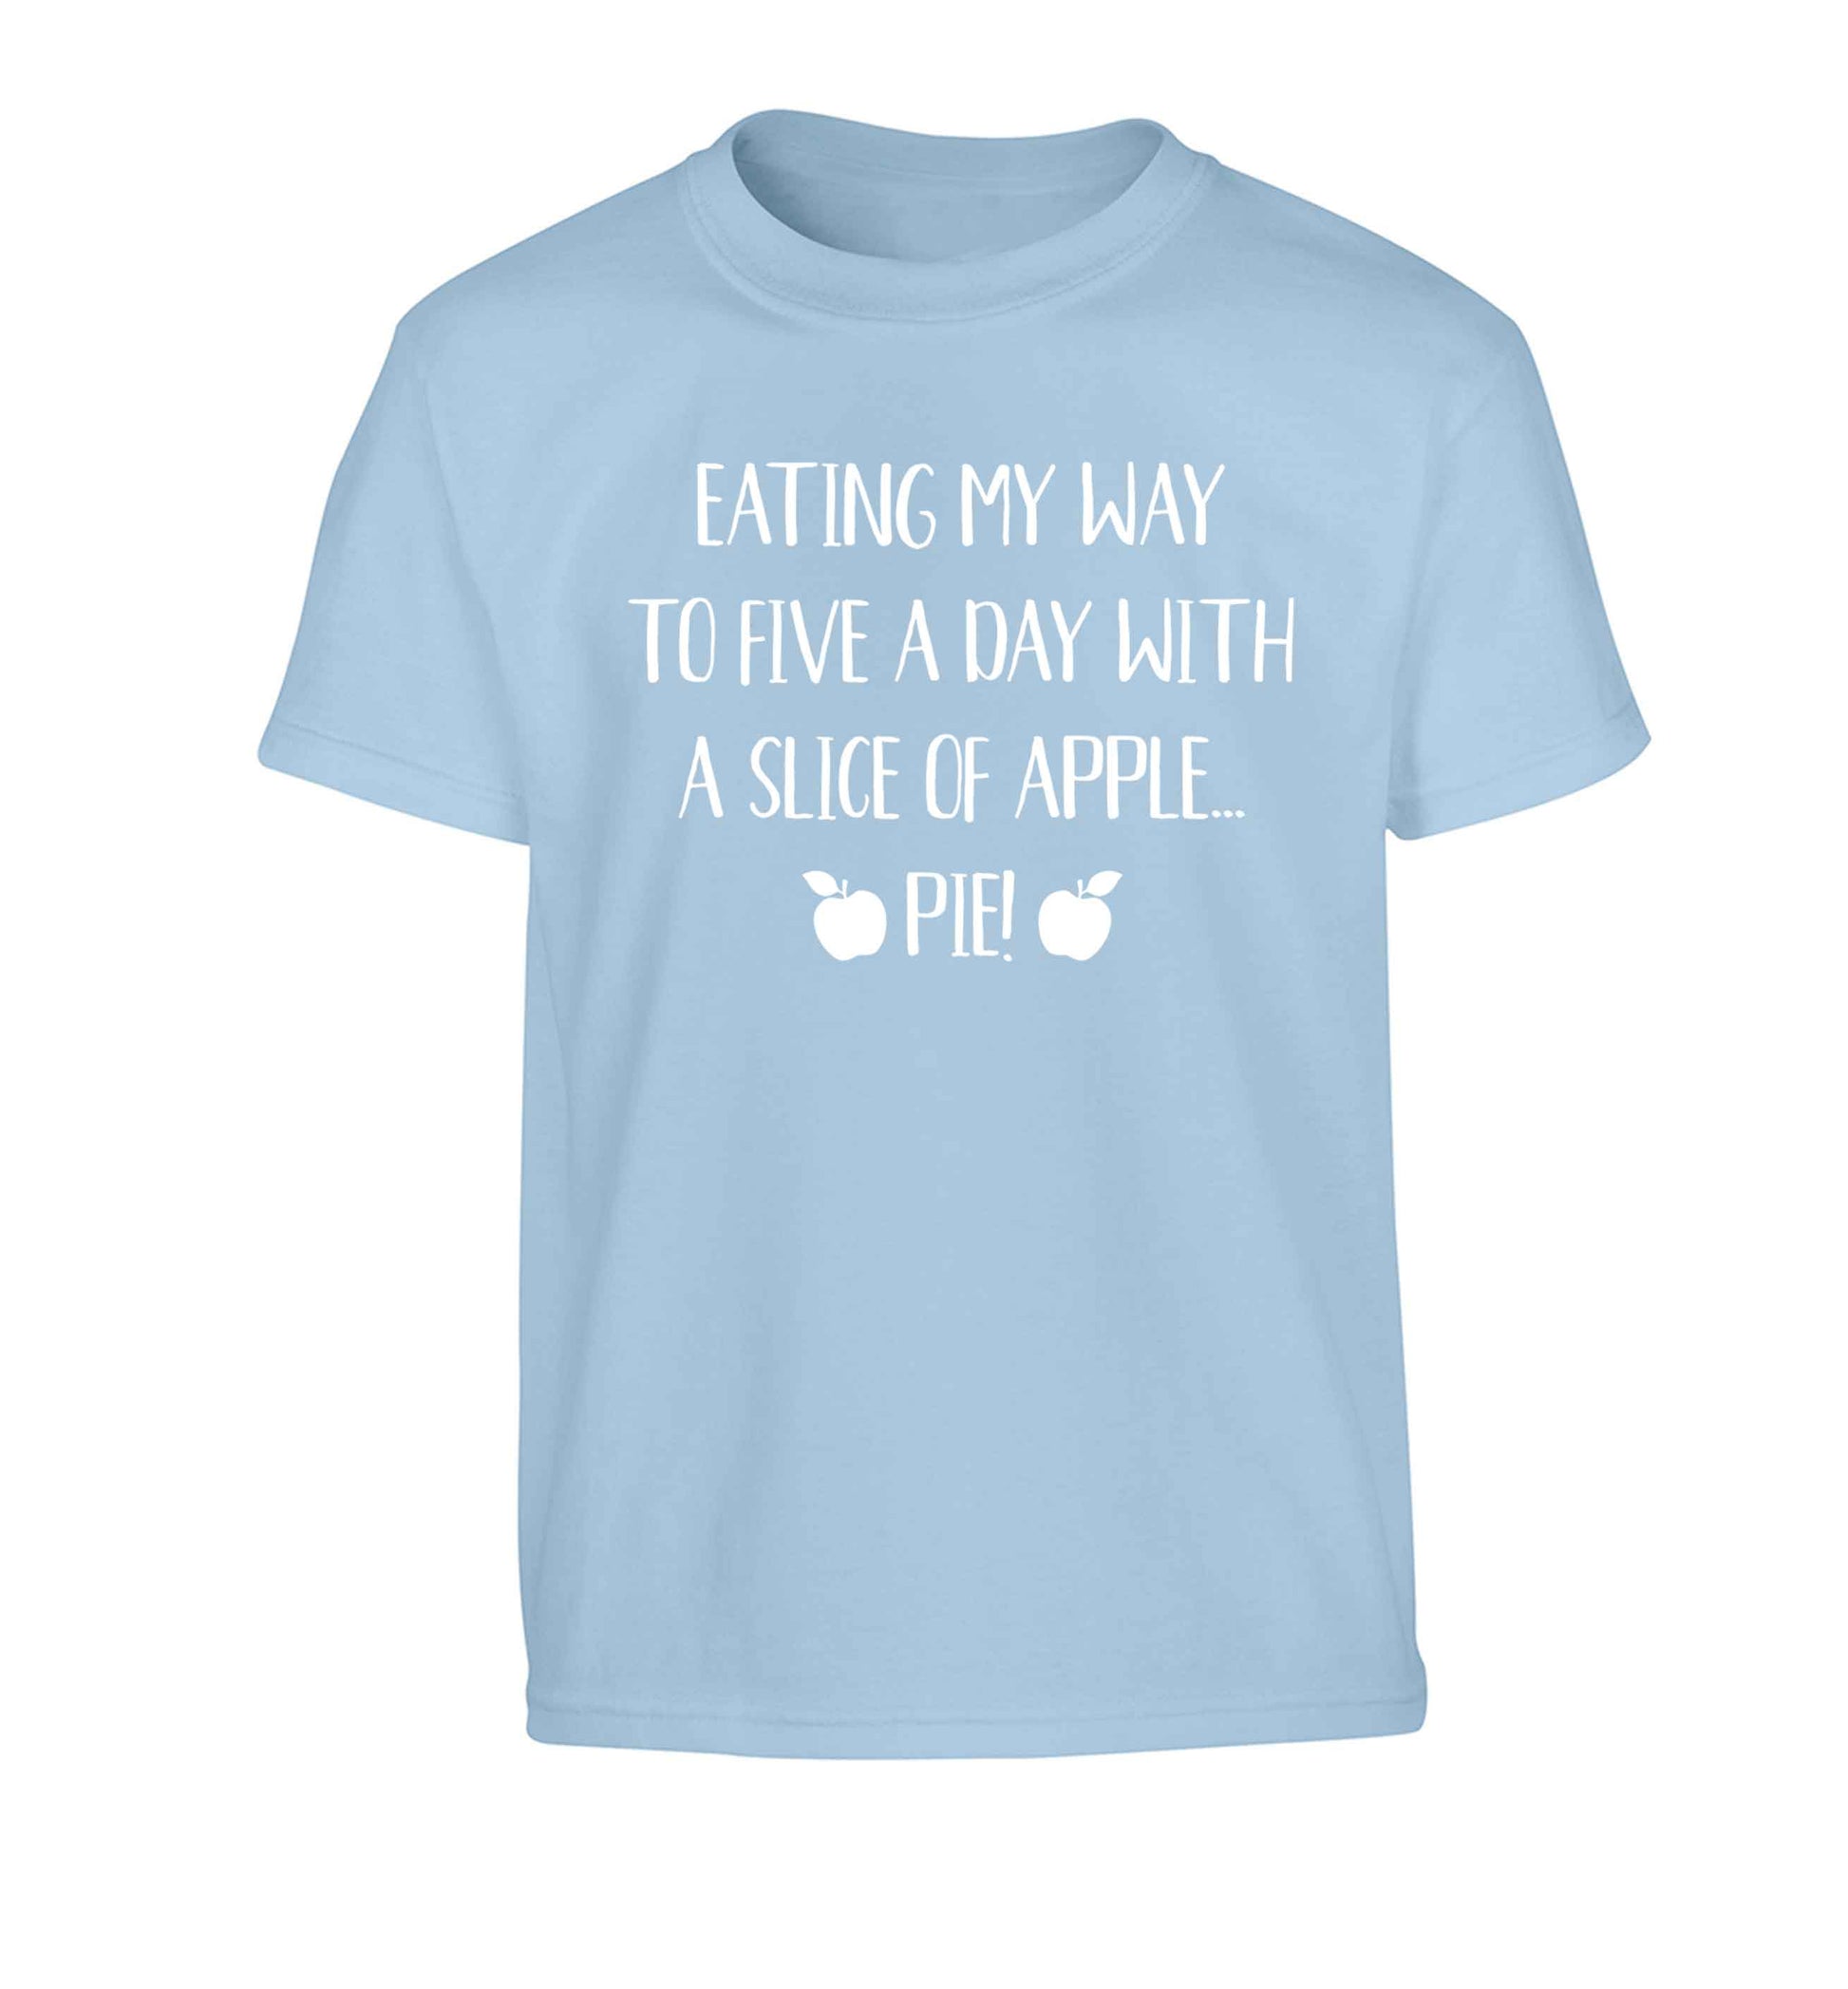 Eating my way to five a day with a slice of apple pie Children's light blue Tshirt 12-13 Years